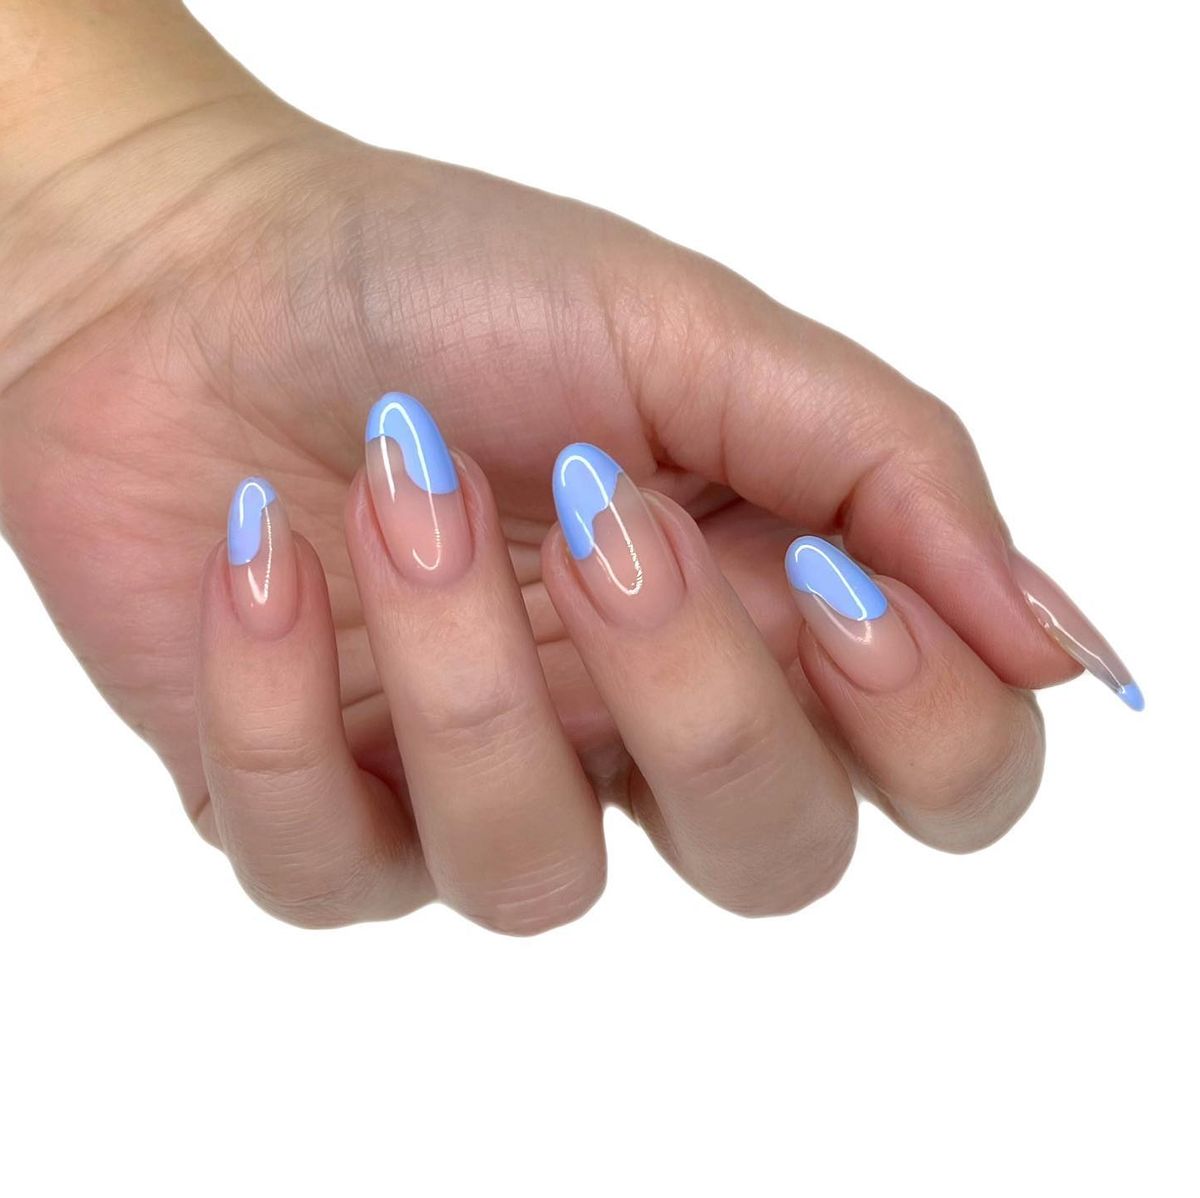 7 Beauty Hacks to Extend the Life of Shellac Nails